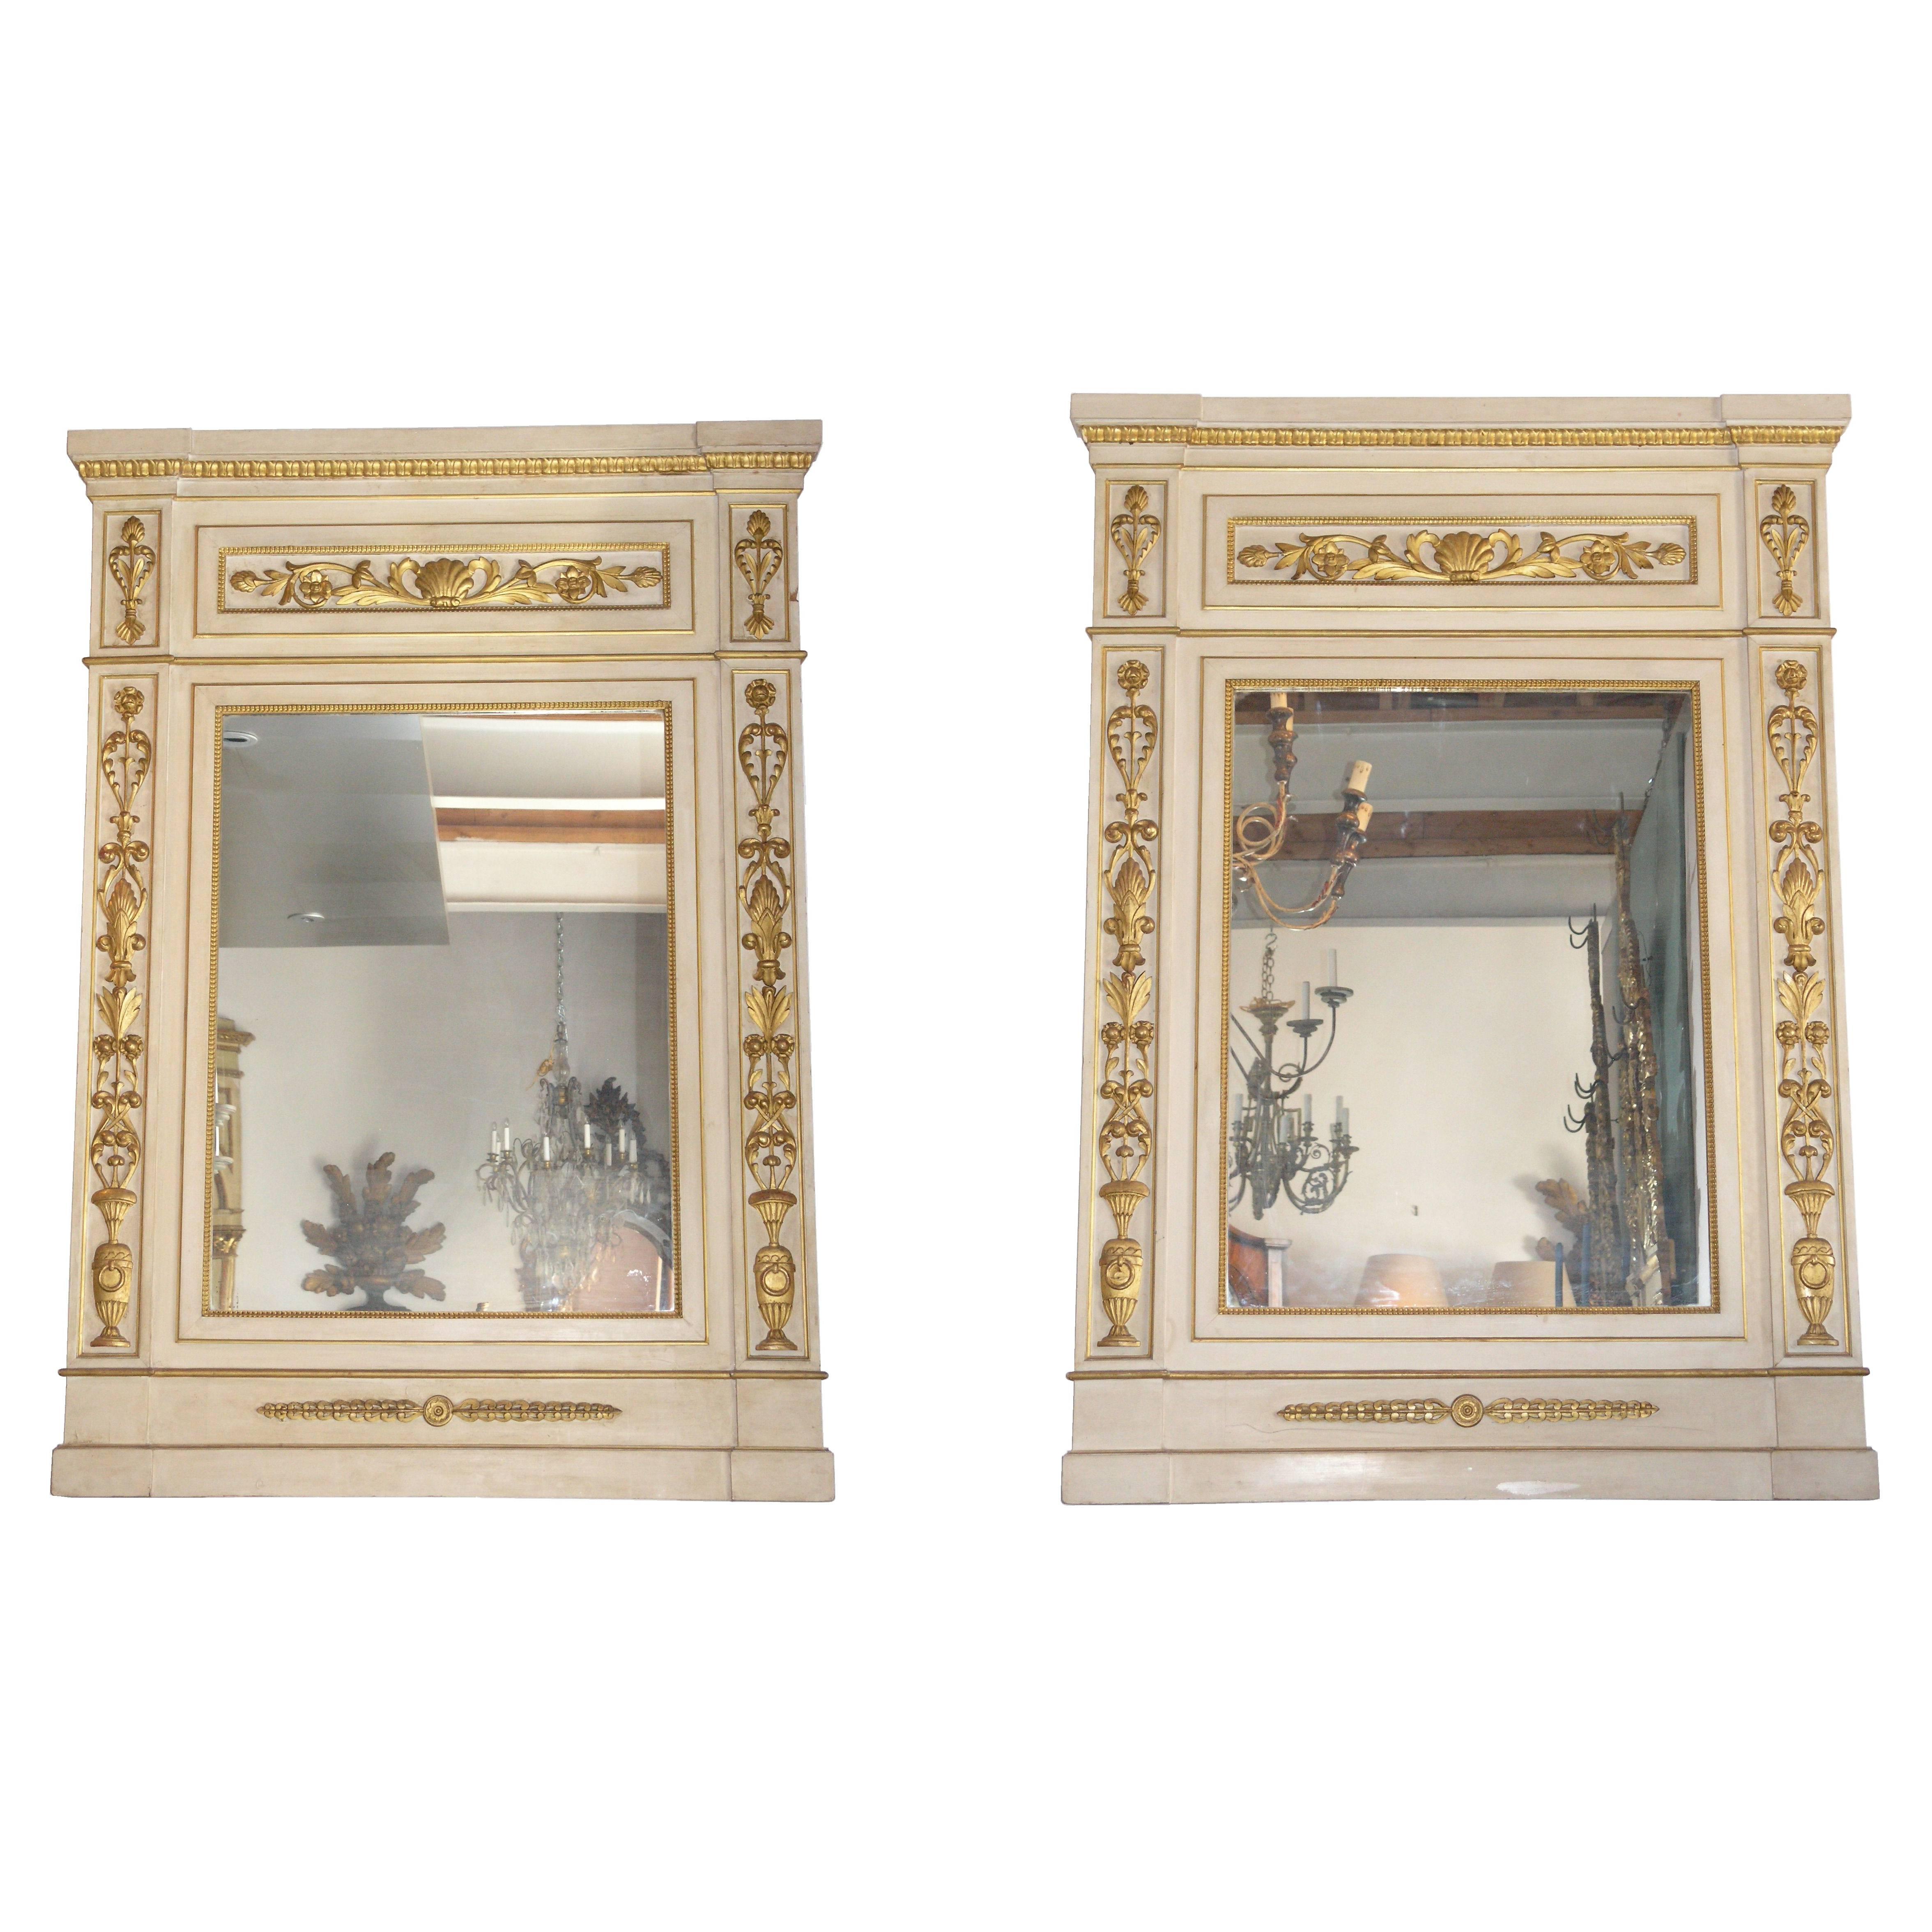  Pair of Parcel-Gilt and Ivory Paint Trumeau Mirrors For Sale